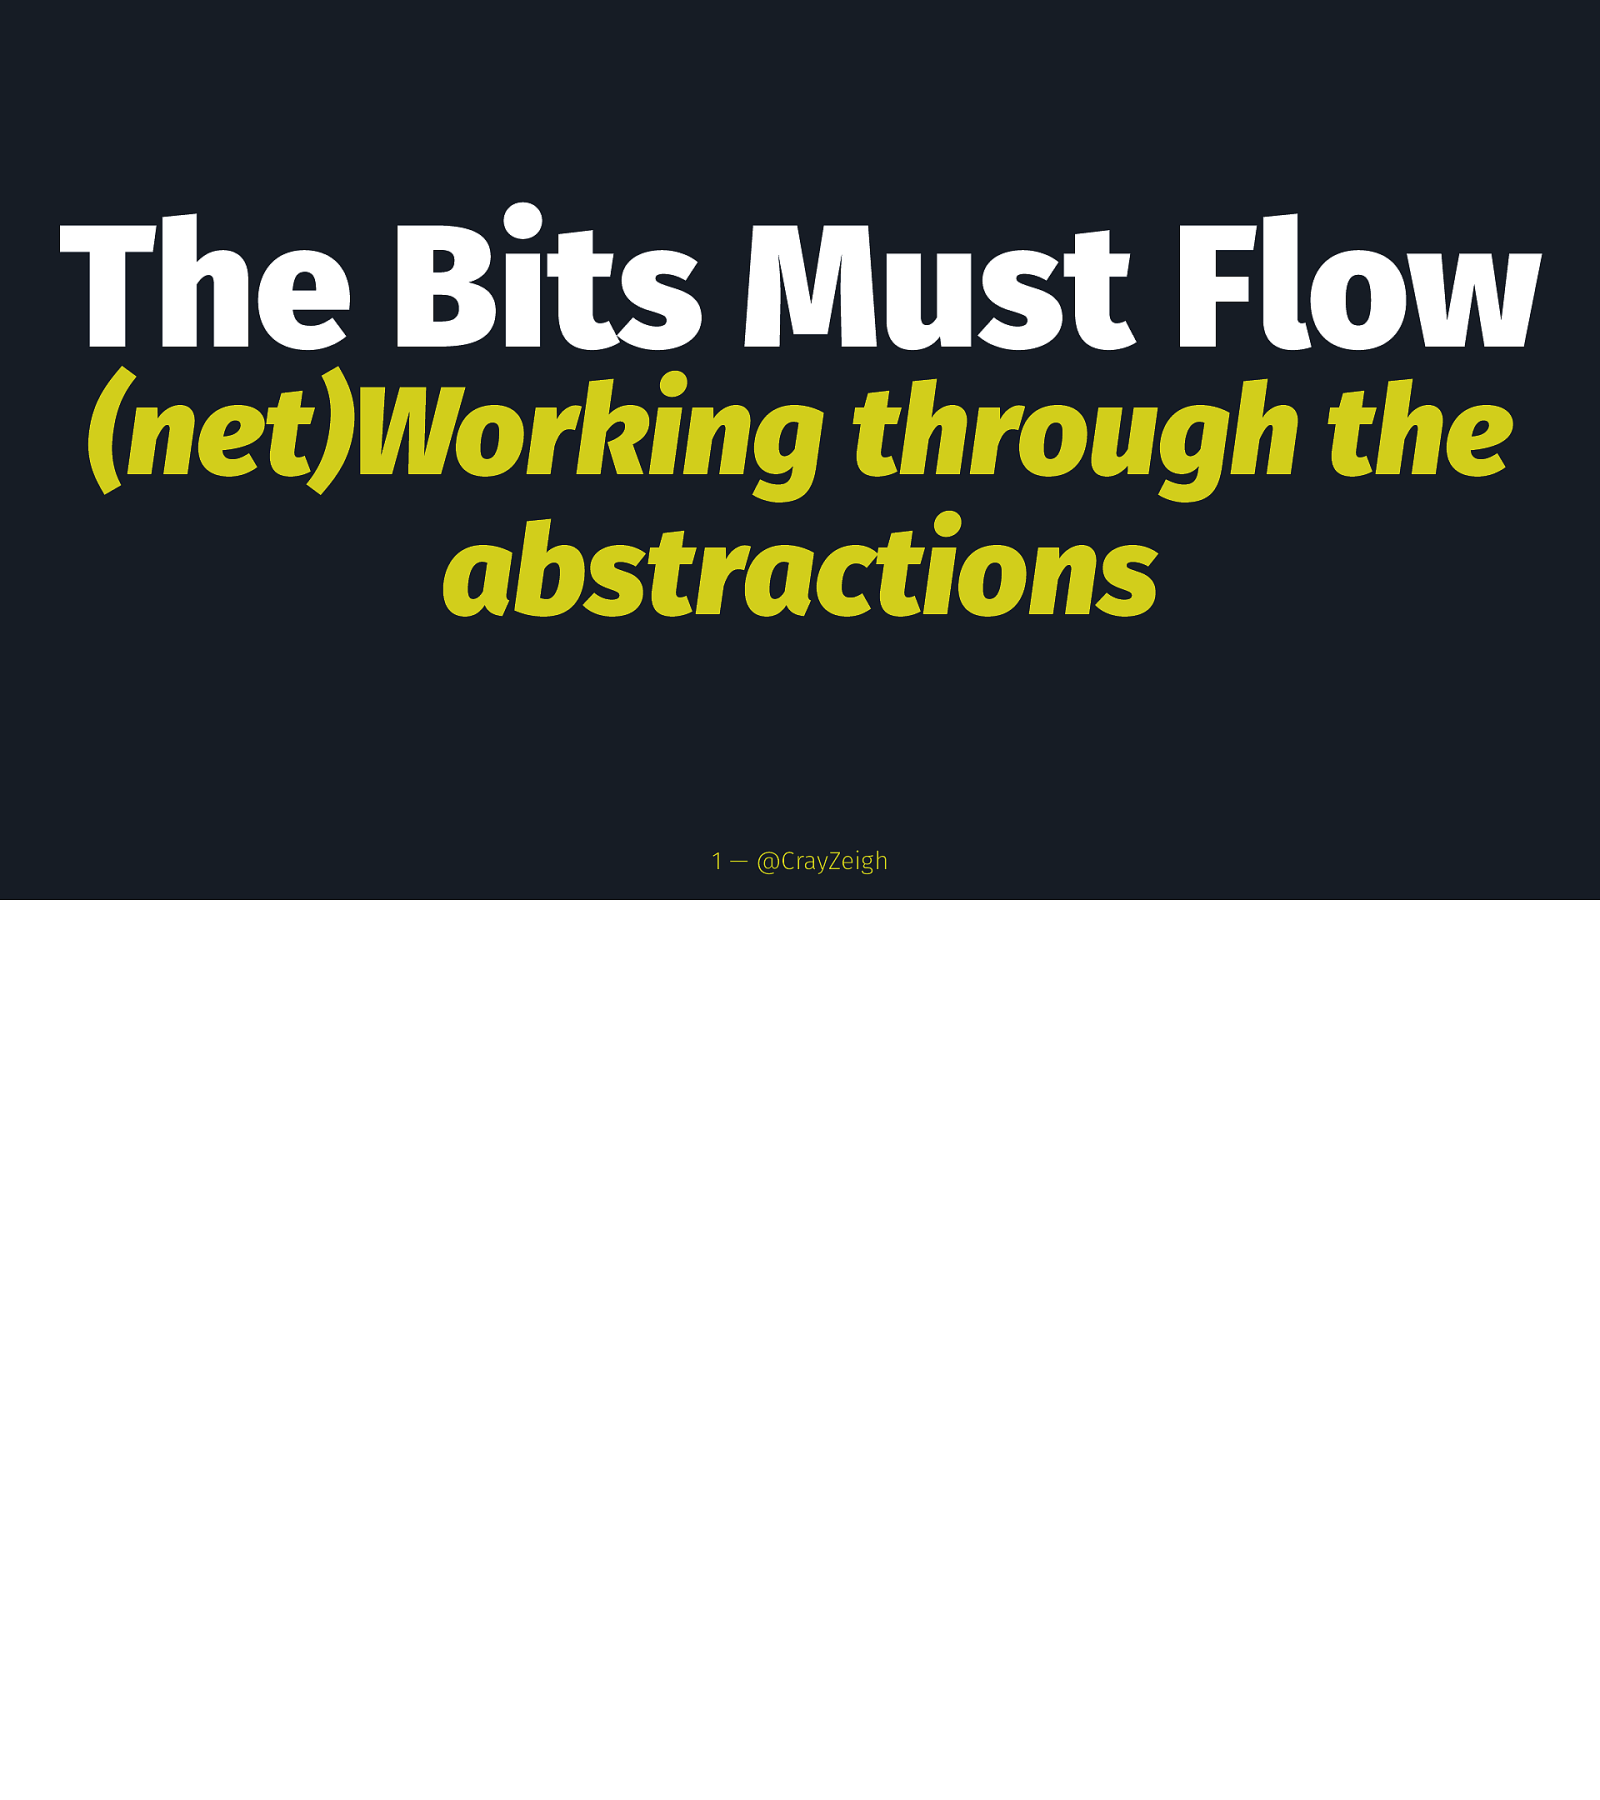 The Bits Must Flow: (Net)Working through the abstractions